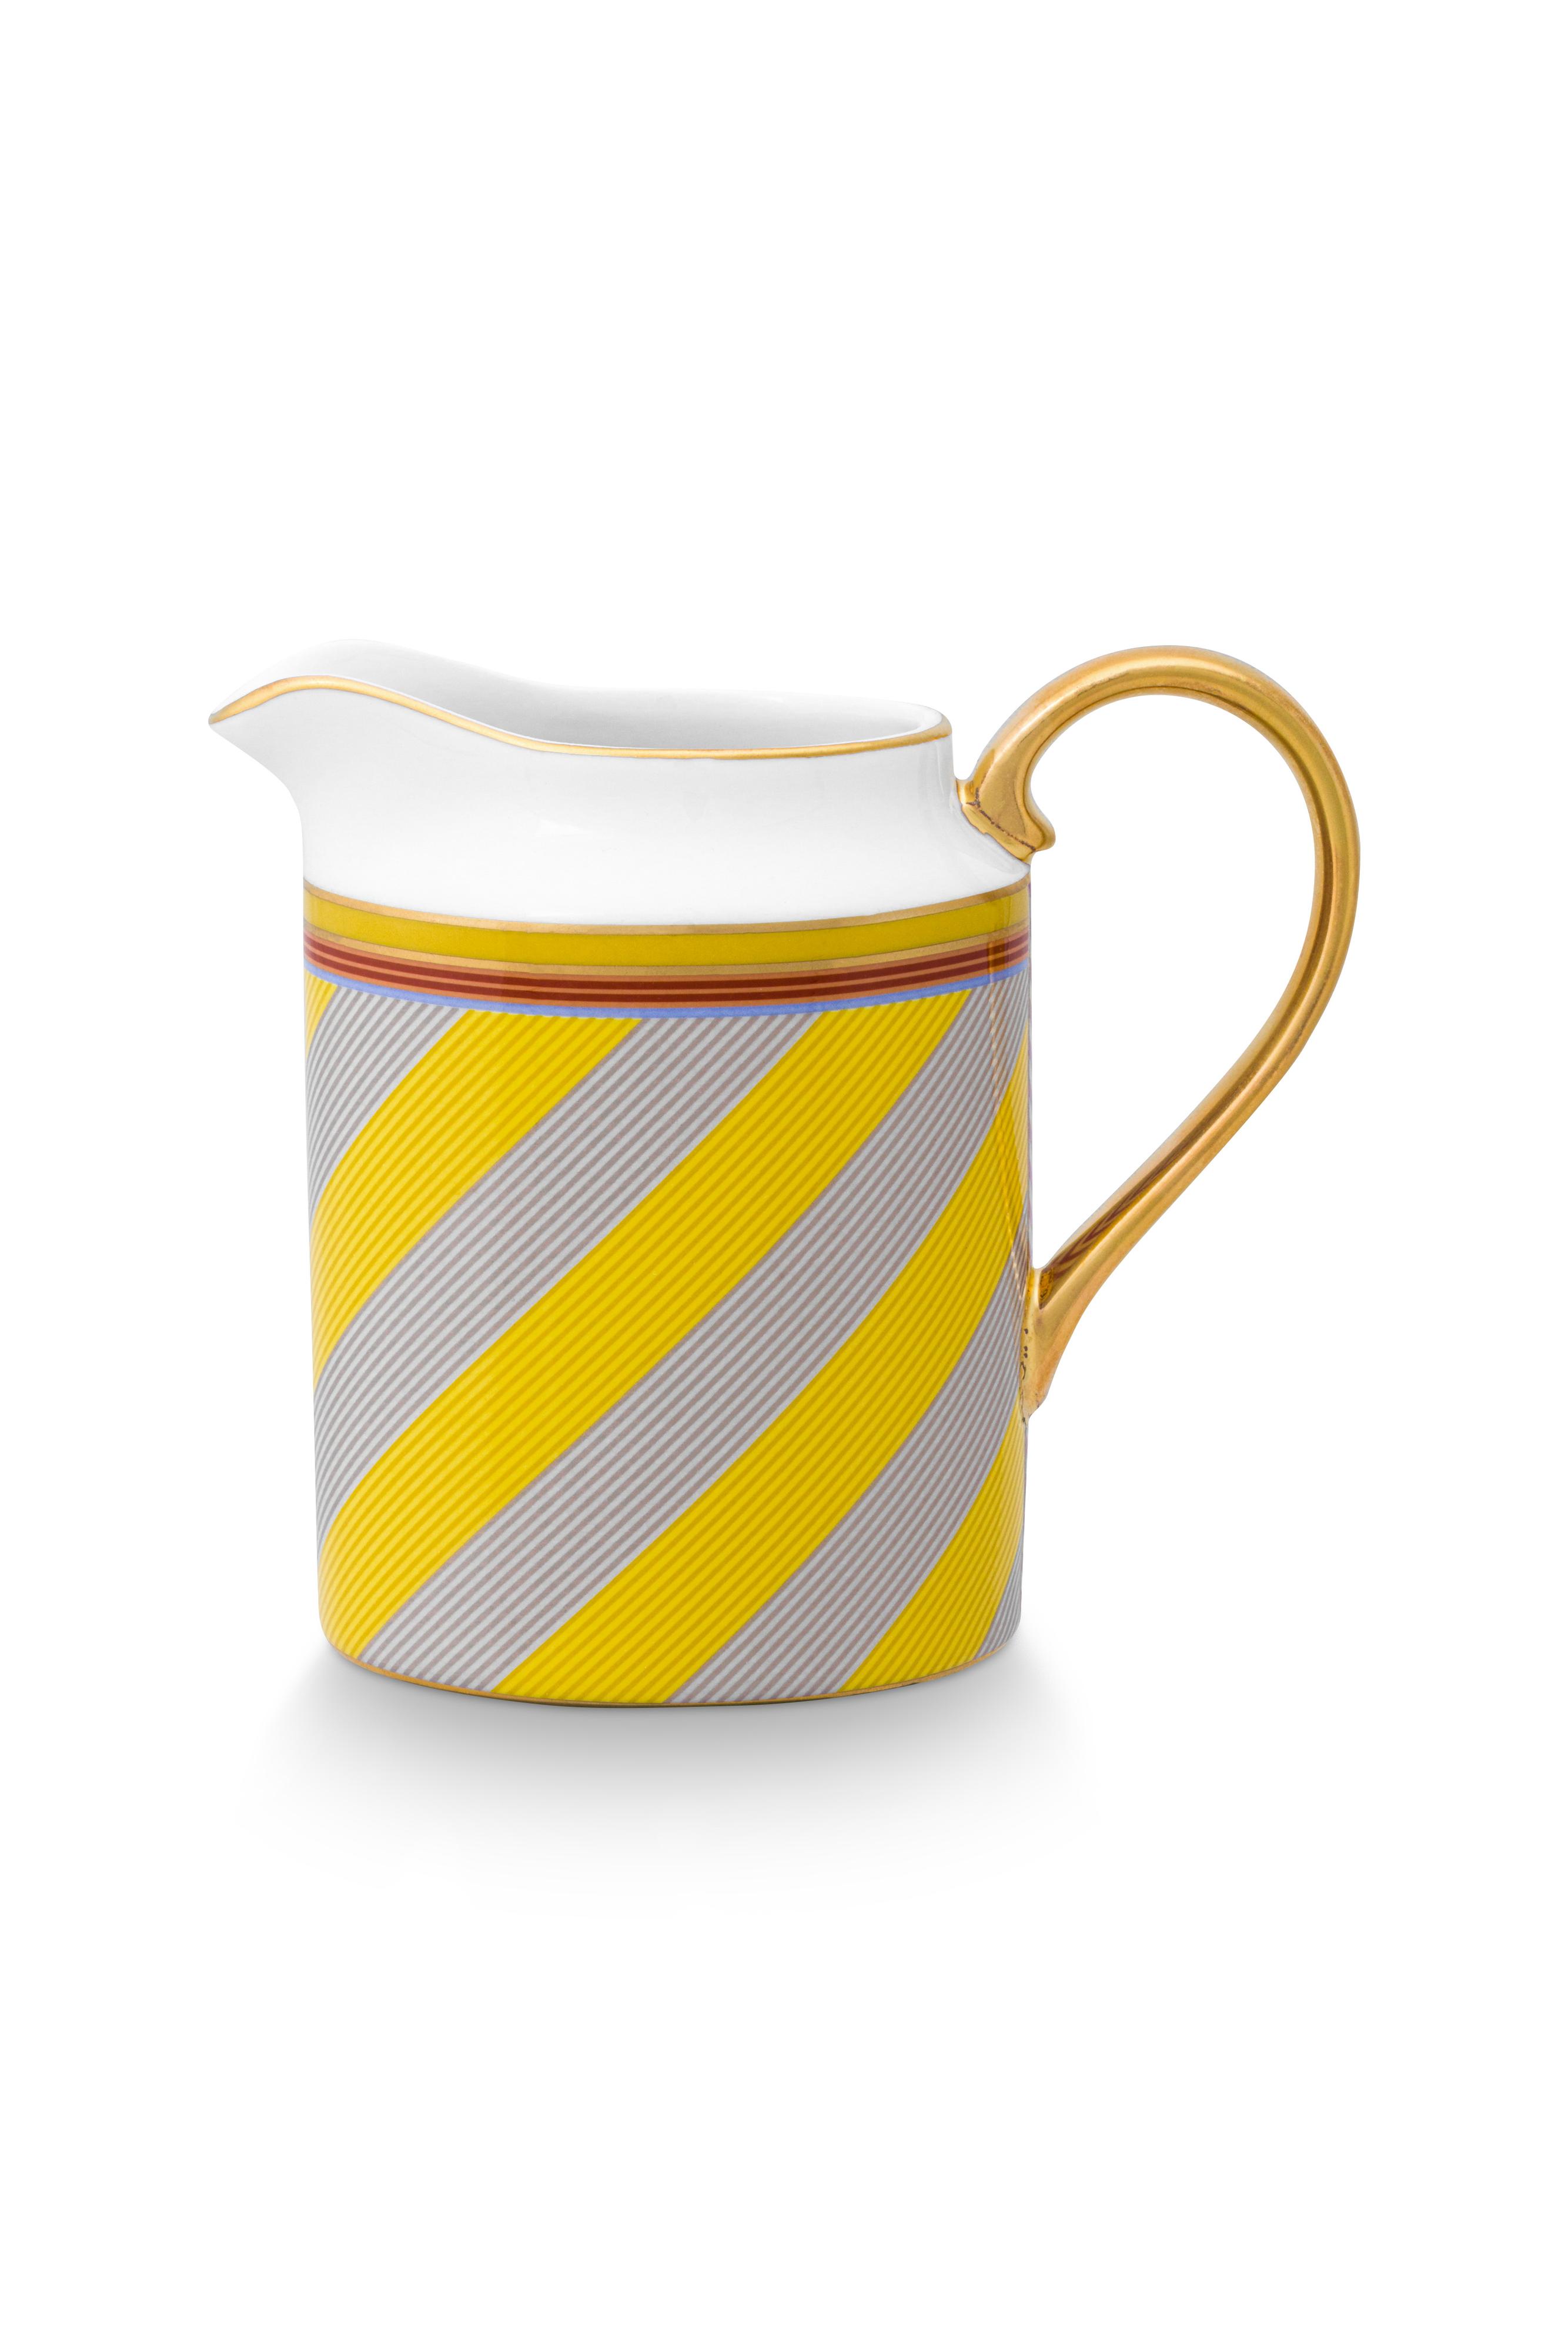 Jug Small Pip Chique Stripes Yellow 260ml Gift